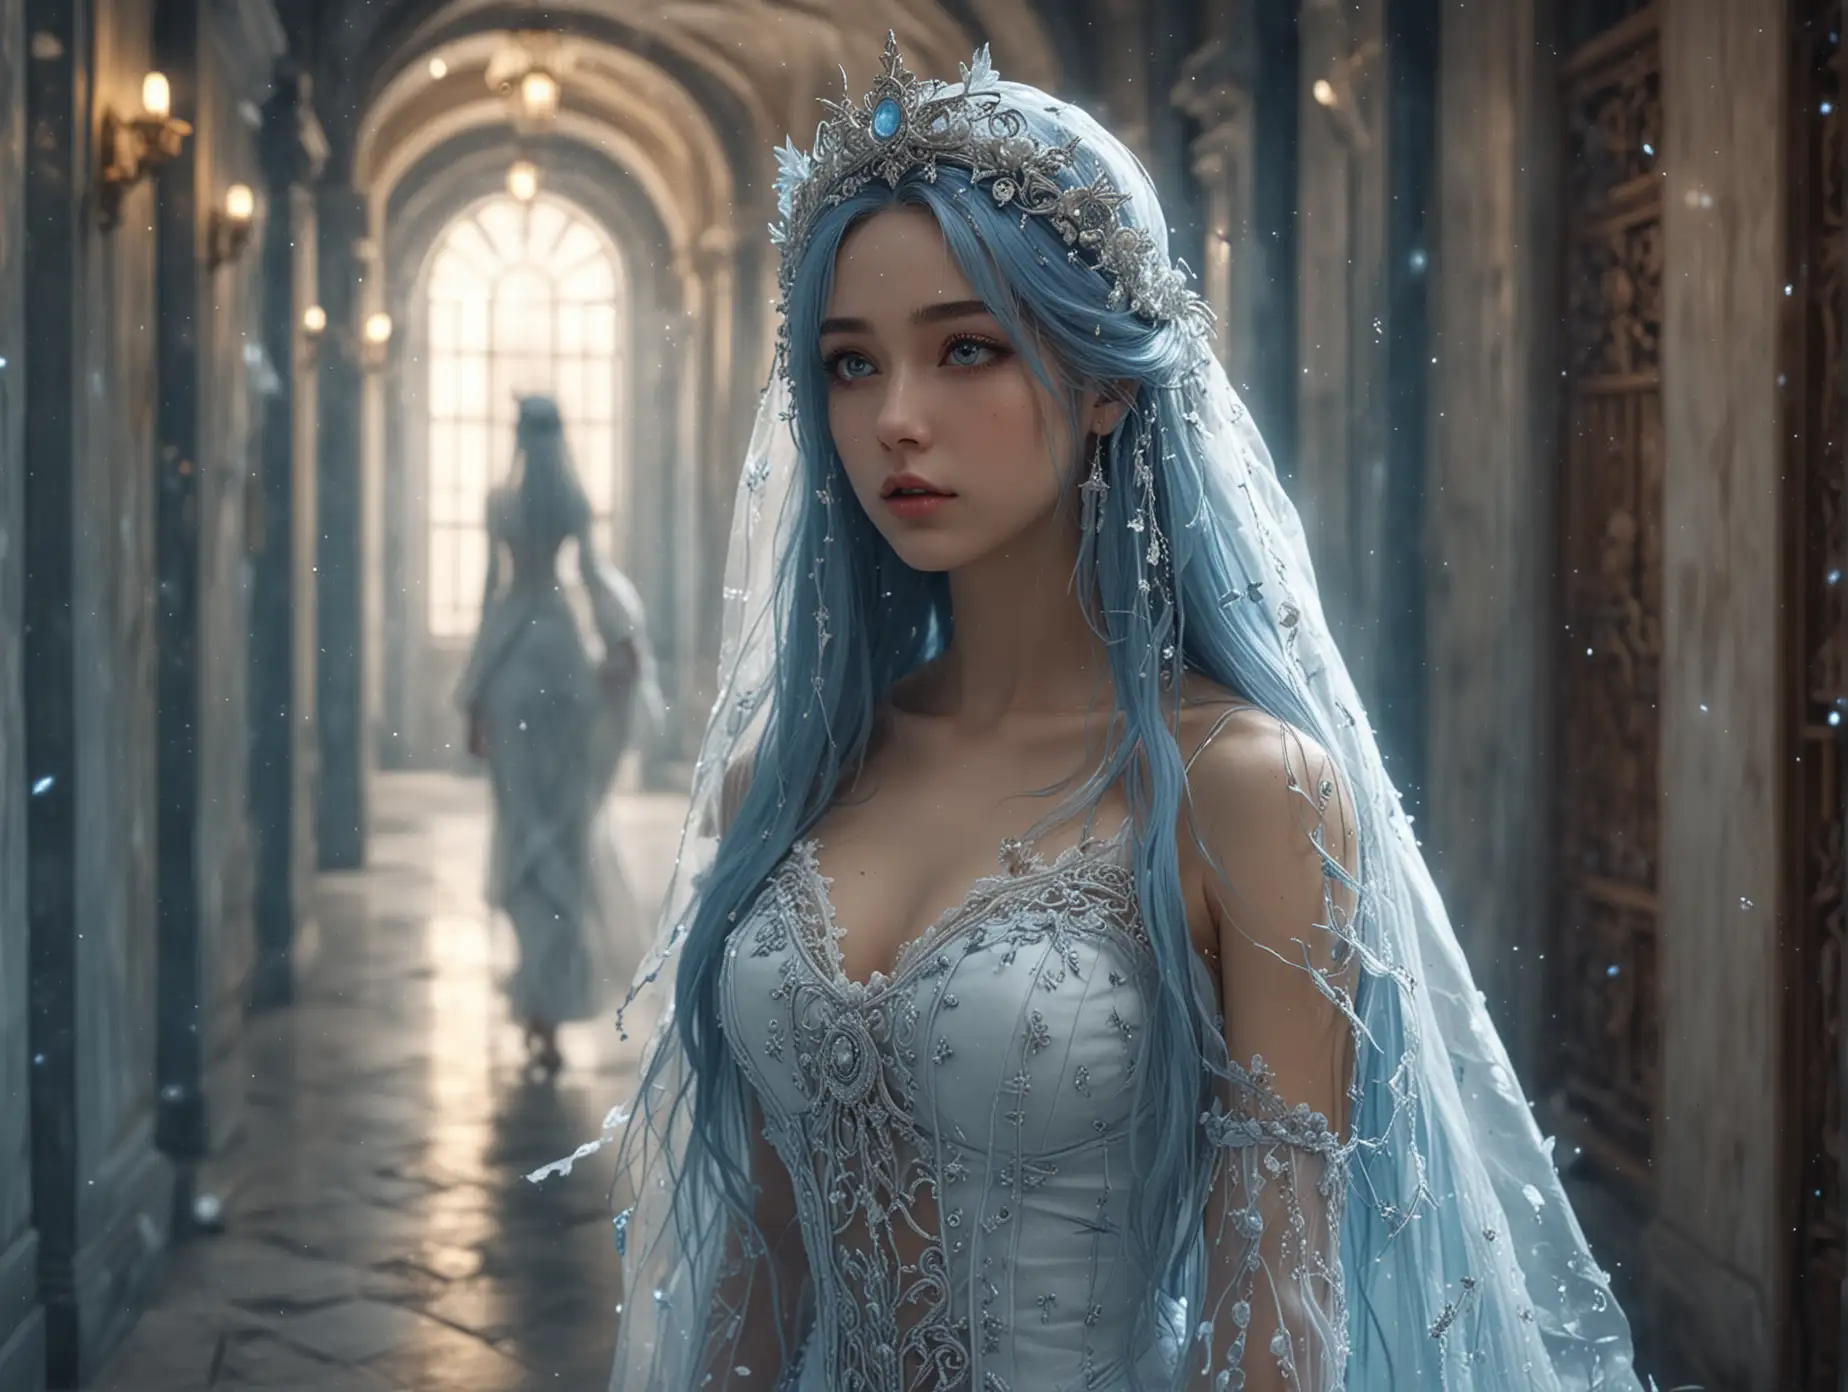 Elegant-Anime-Woman-in-White-and-Blue-Dress-Walking-in-Antique-Corridor